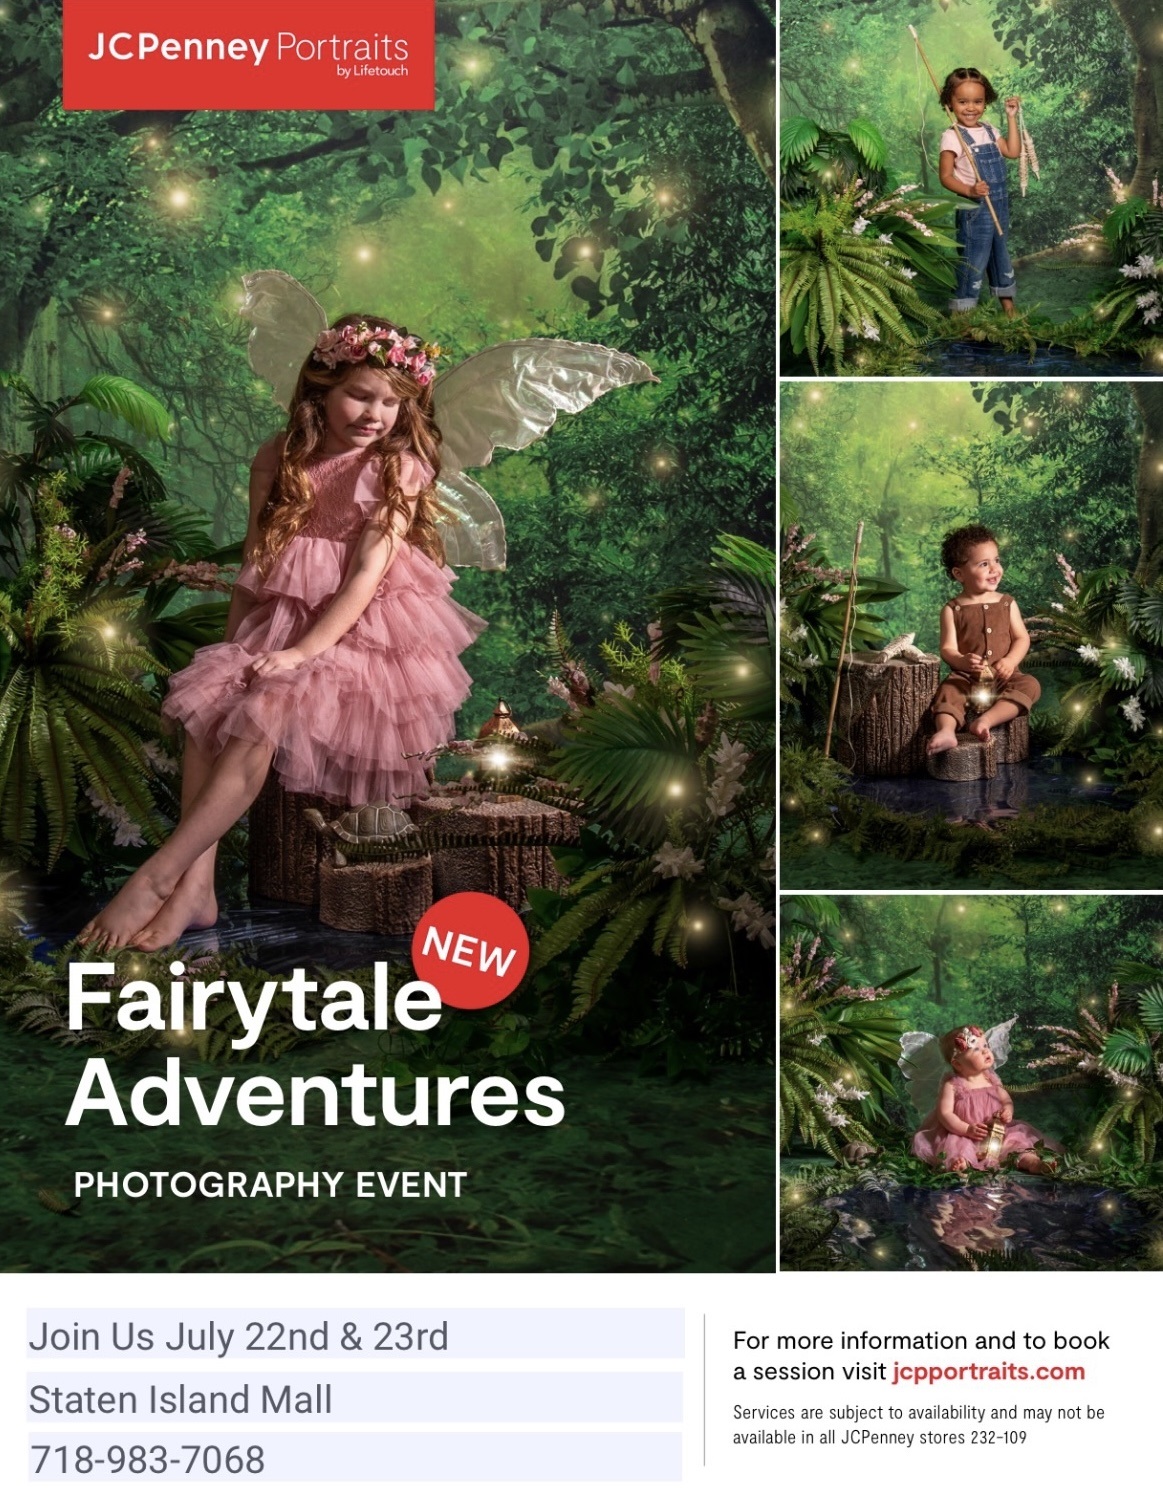 Fairytale Adventures July 22 & 23 from JCPenney Portraits